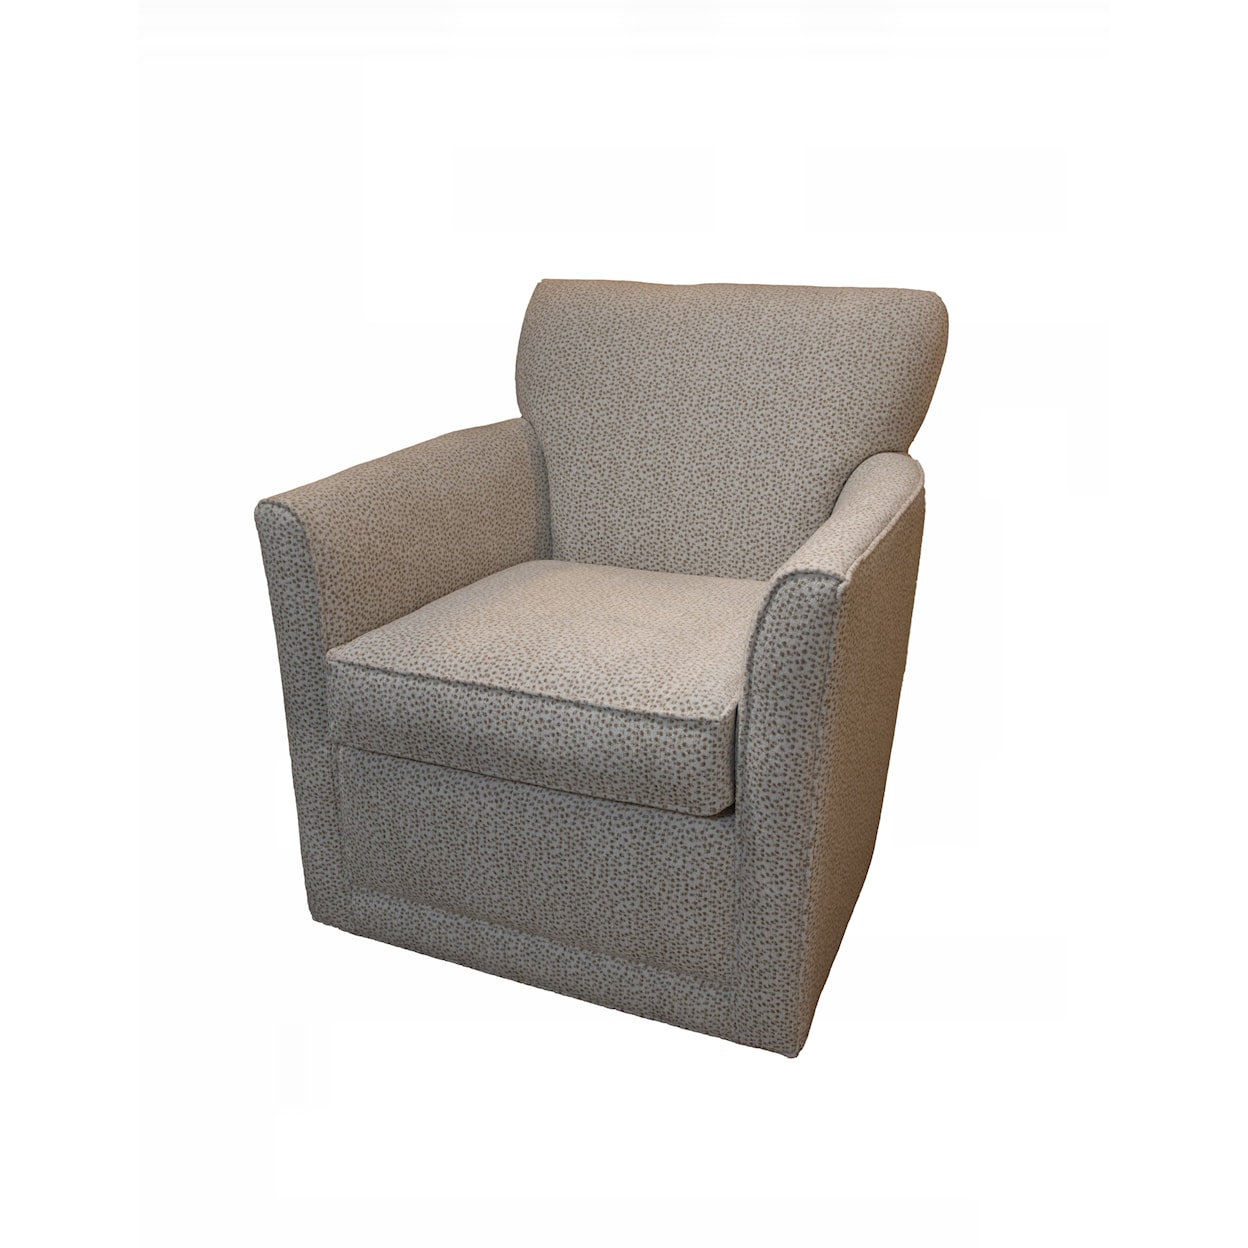 Rowe Times Square Upholstered Swivel Chair